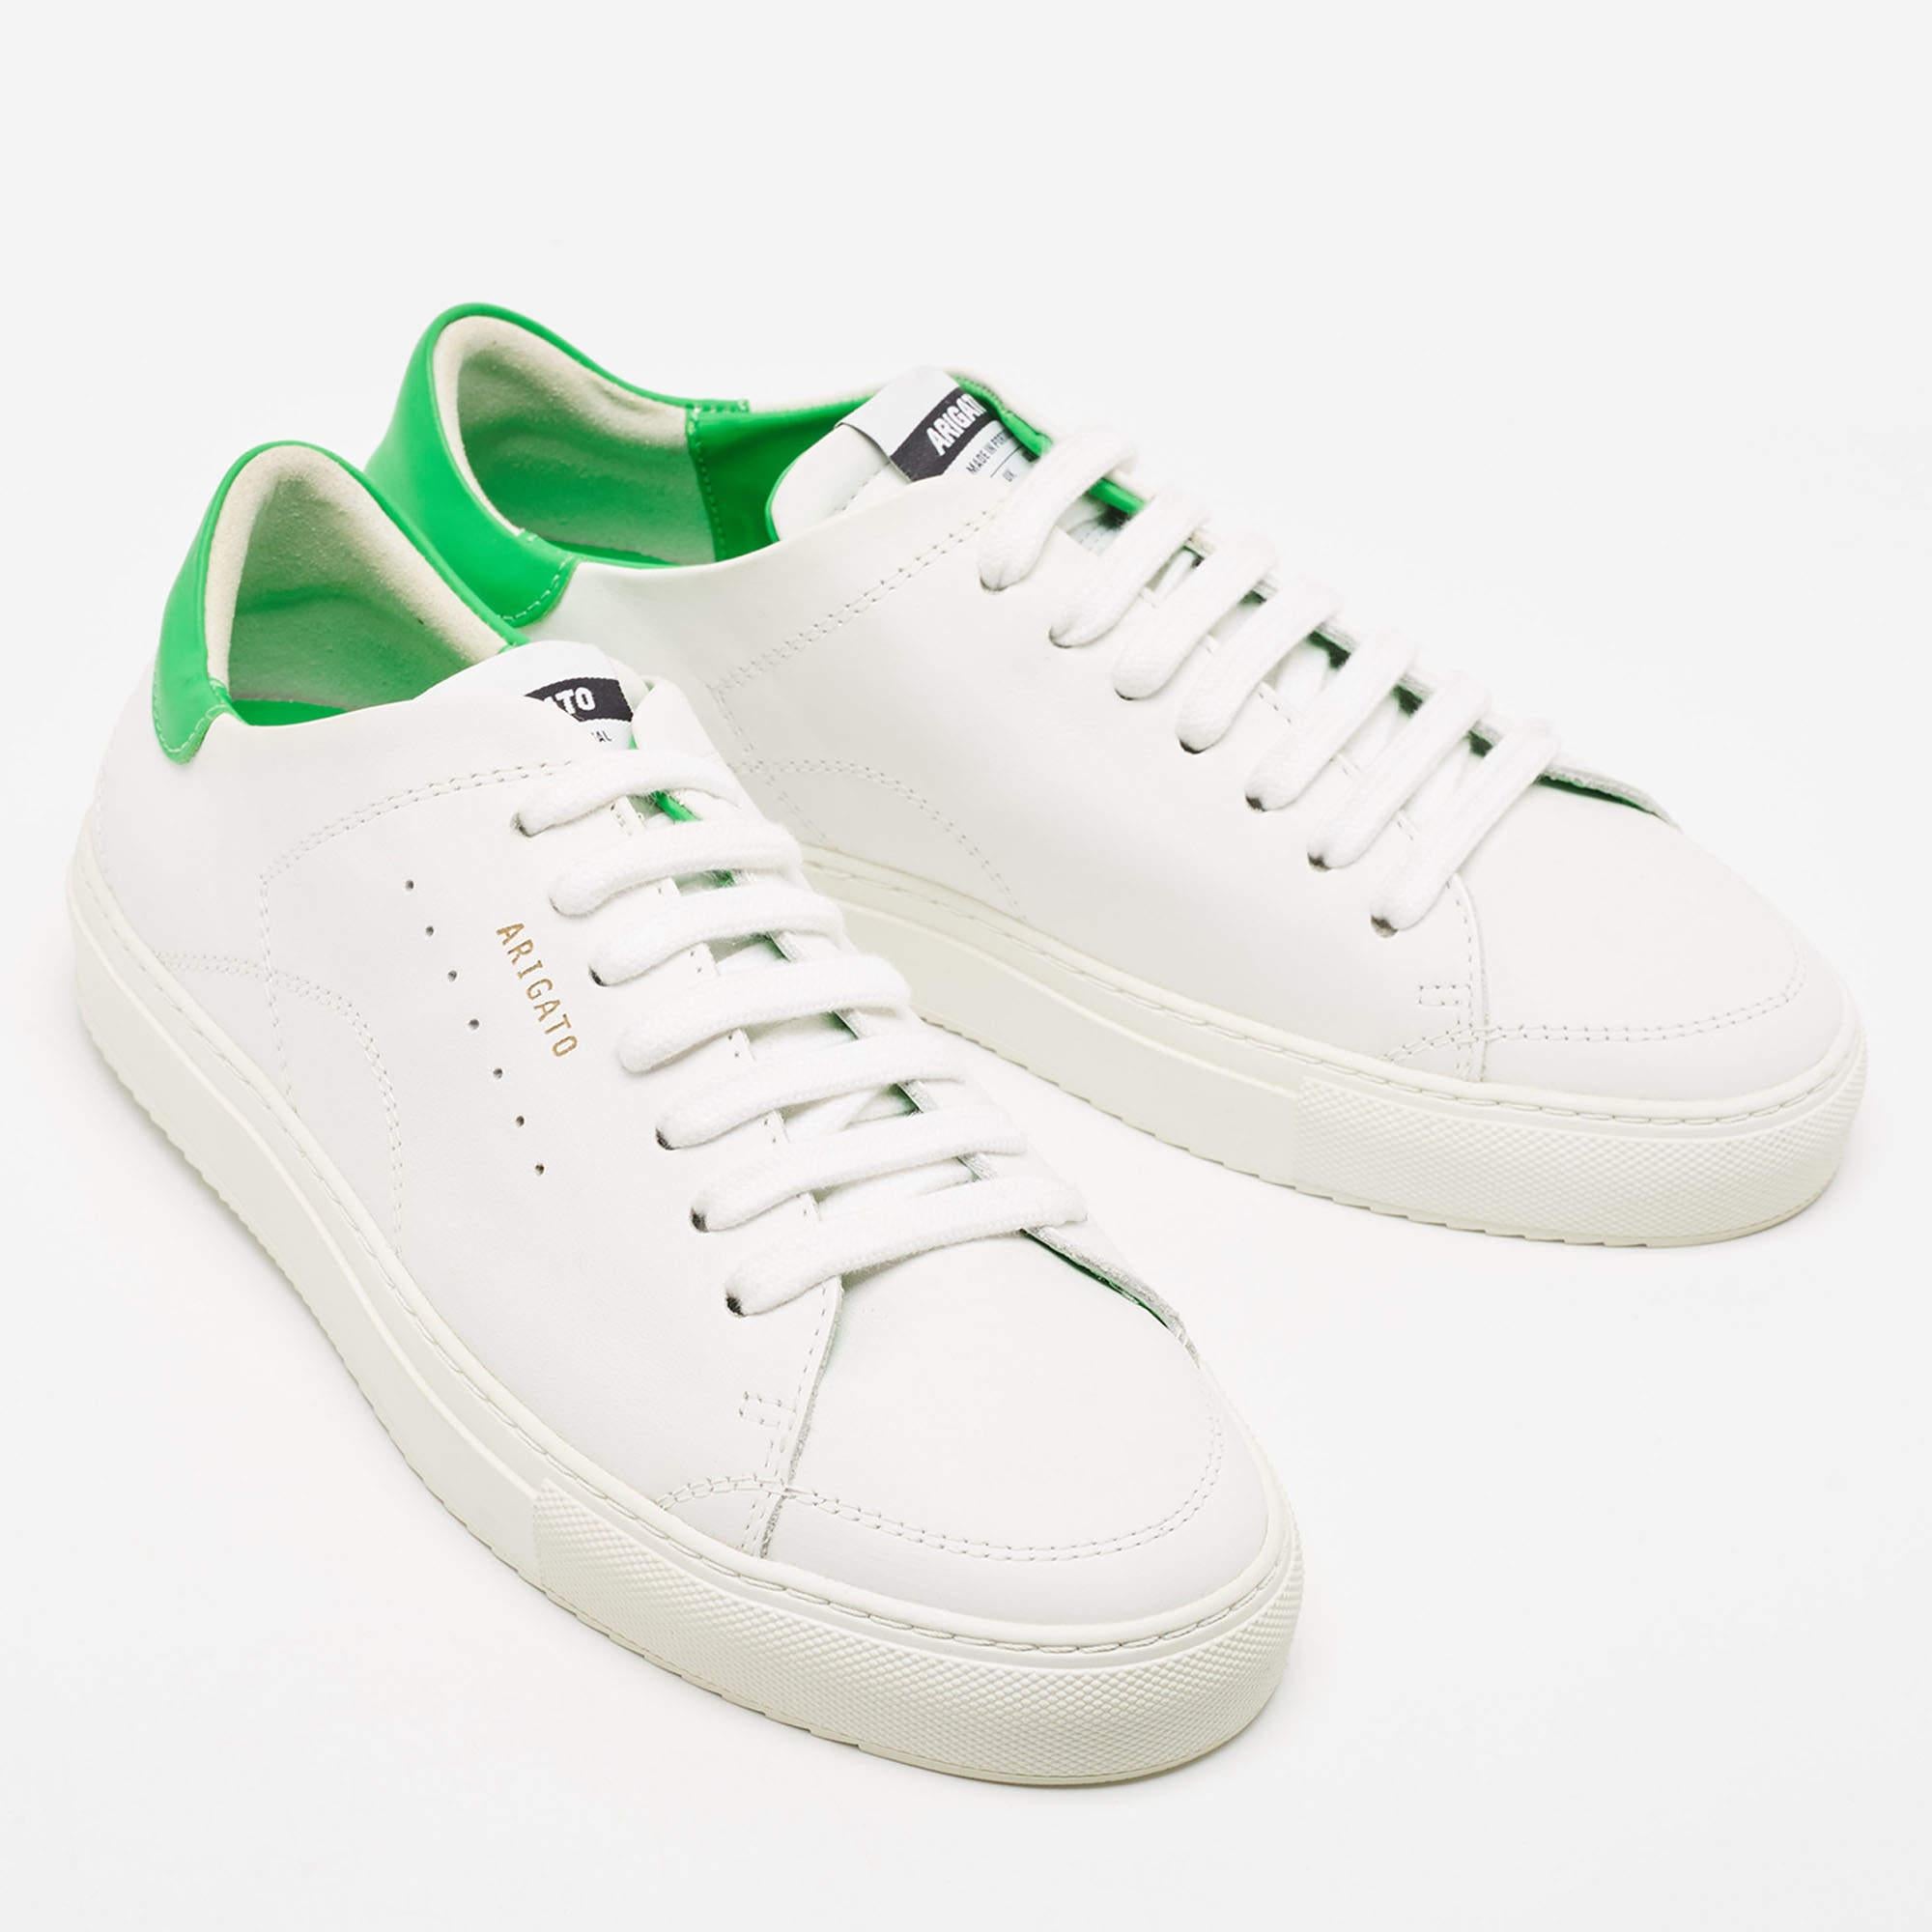 Axel Arigato White/Green Leather Clean Sneakers Size 40 For Sale 1